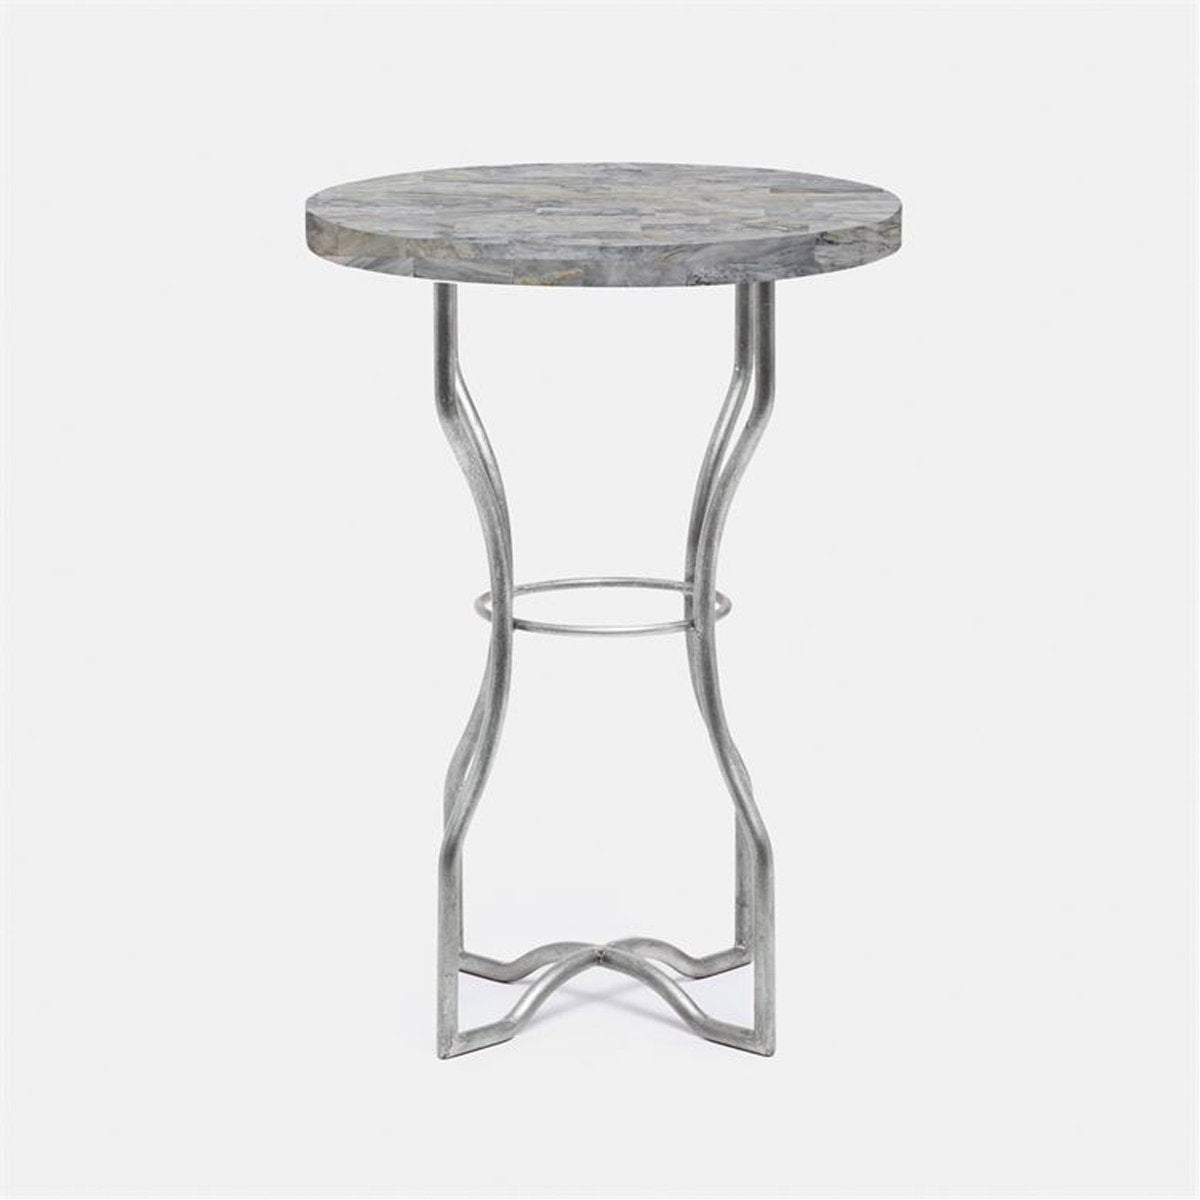 Made Goods Osten Classic Metal Side Table in Stone